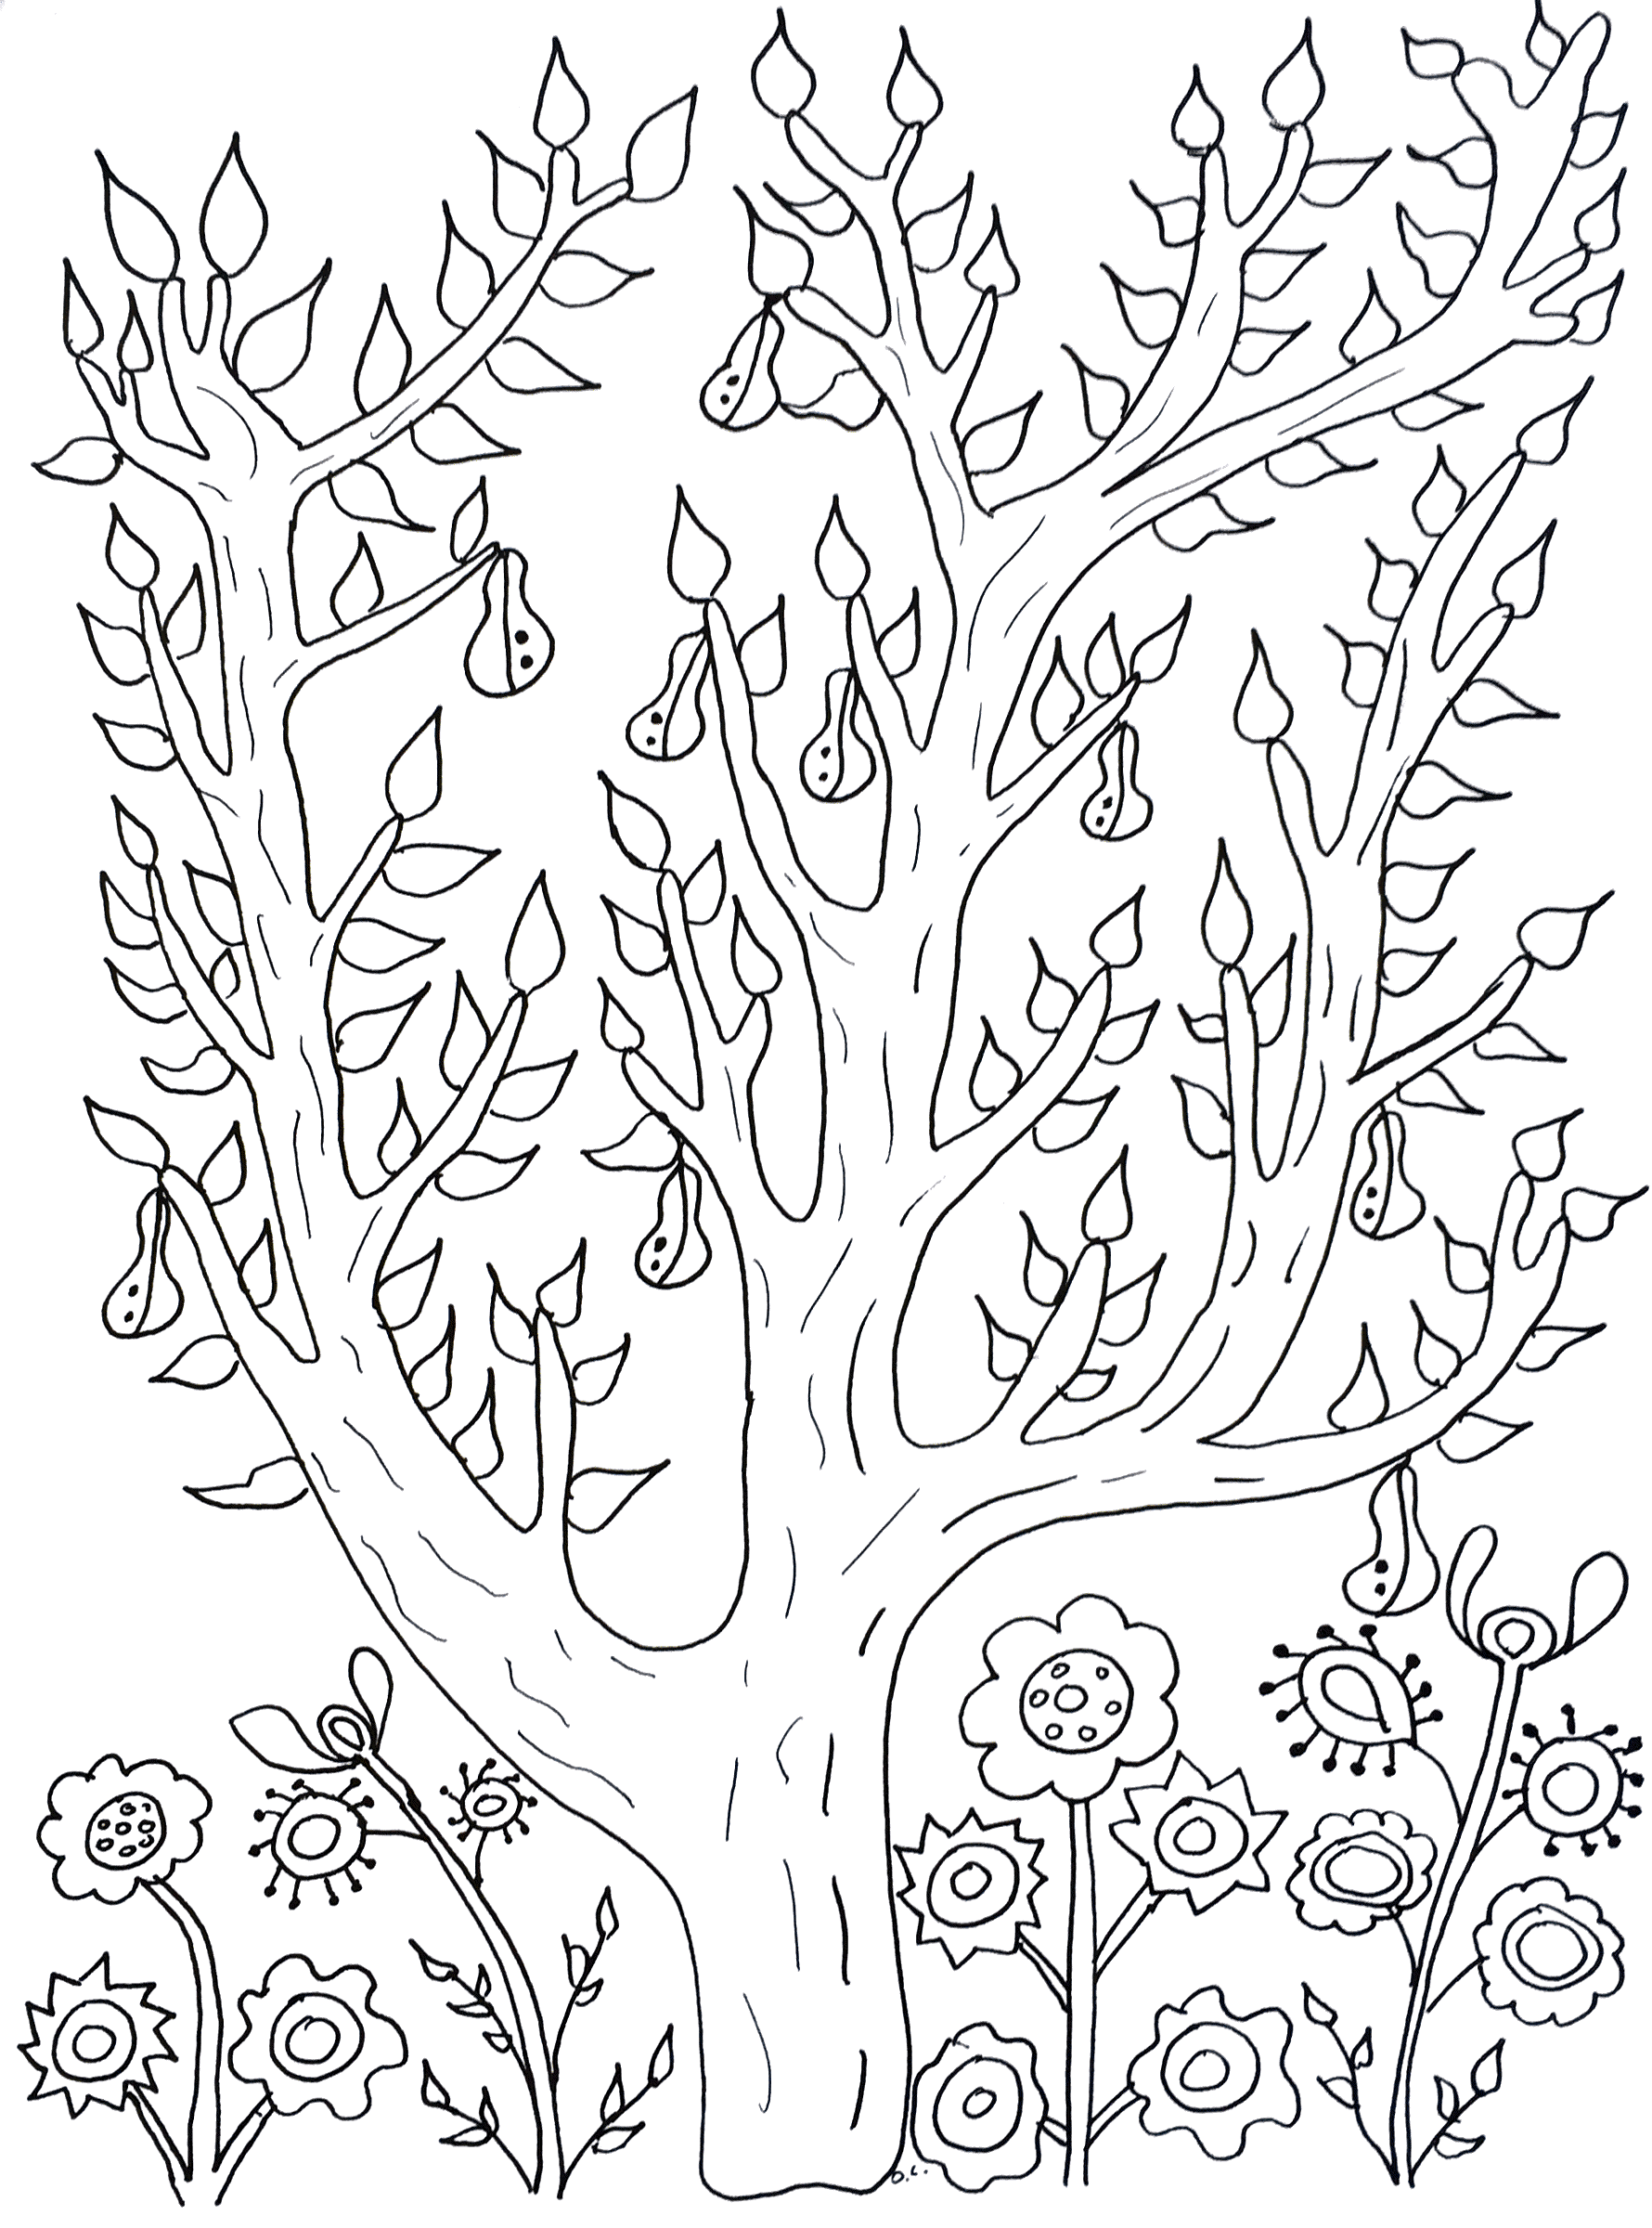 Cute tree with leaves and pears olivier - Flowers Adult Coloring Pages